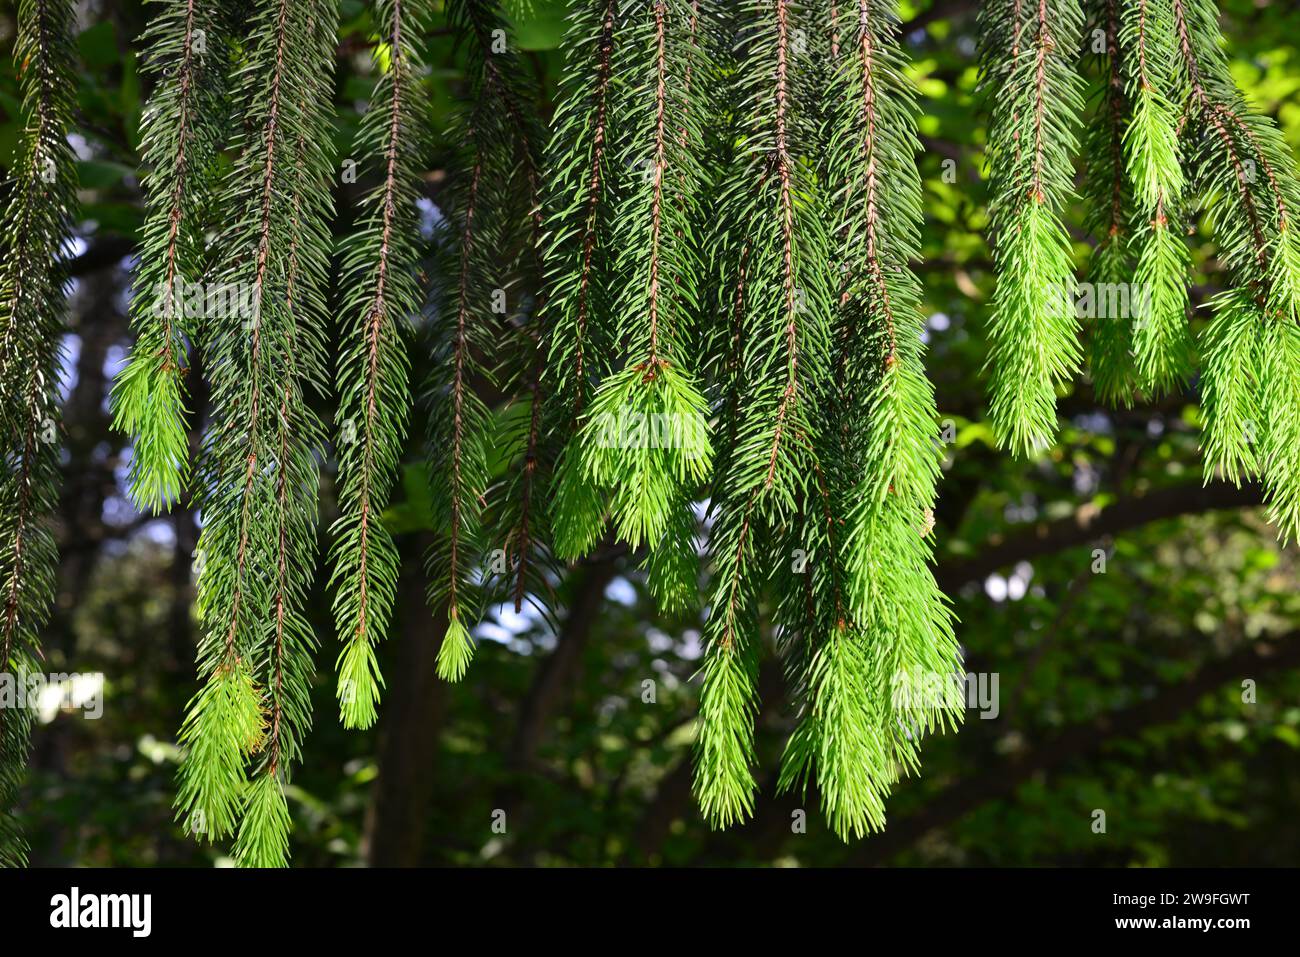 A branch of European spruce or Picea abies with young shoots. Cultivar Virgata or Snake branch spruce Stock Photo